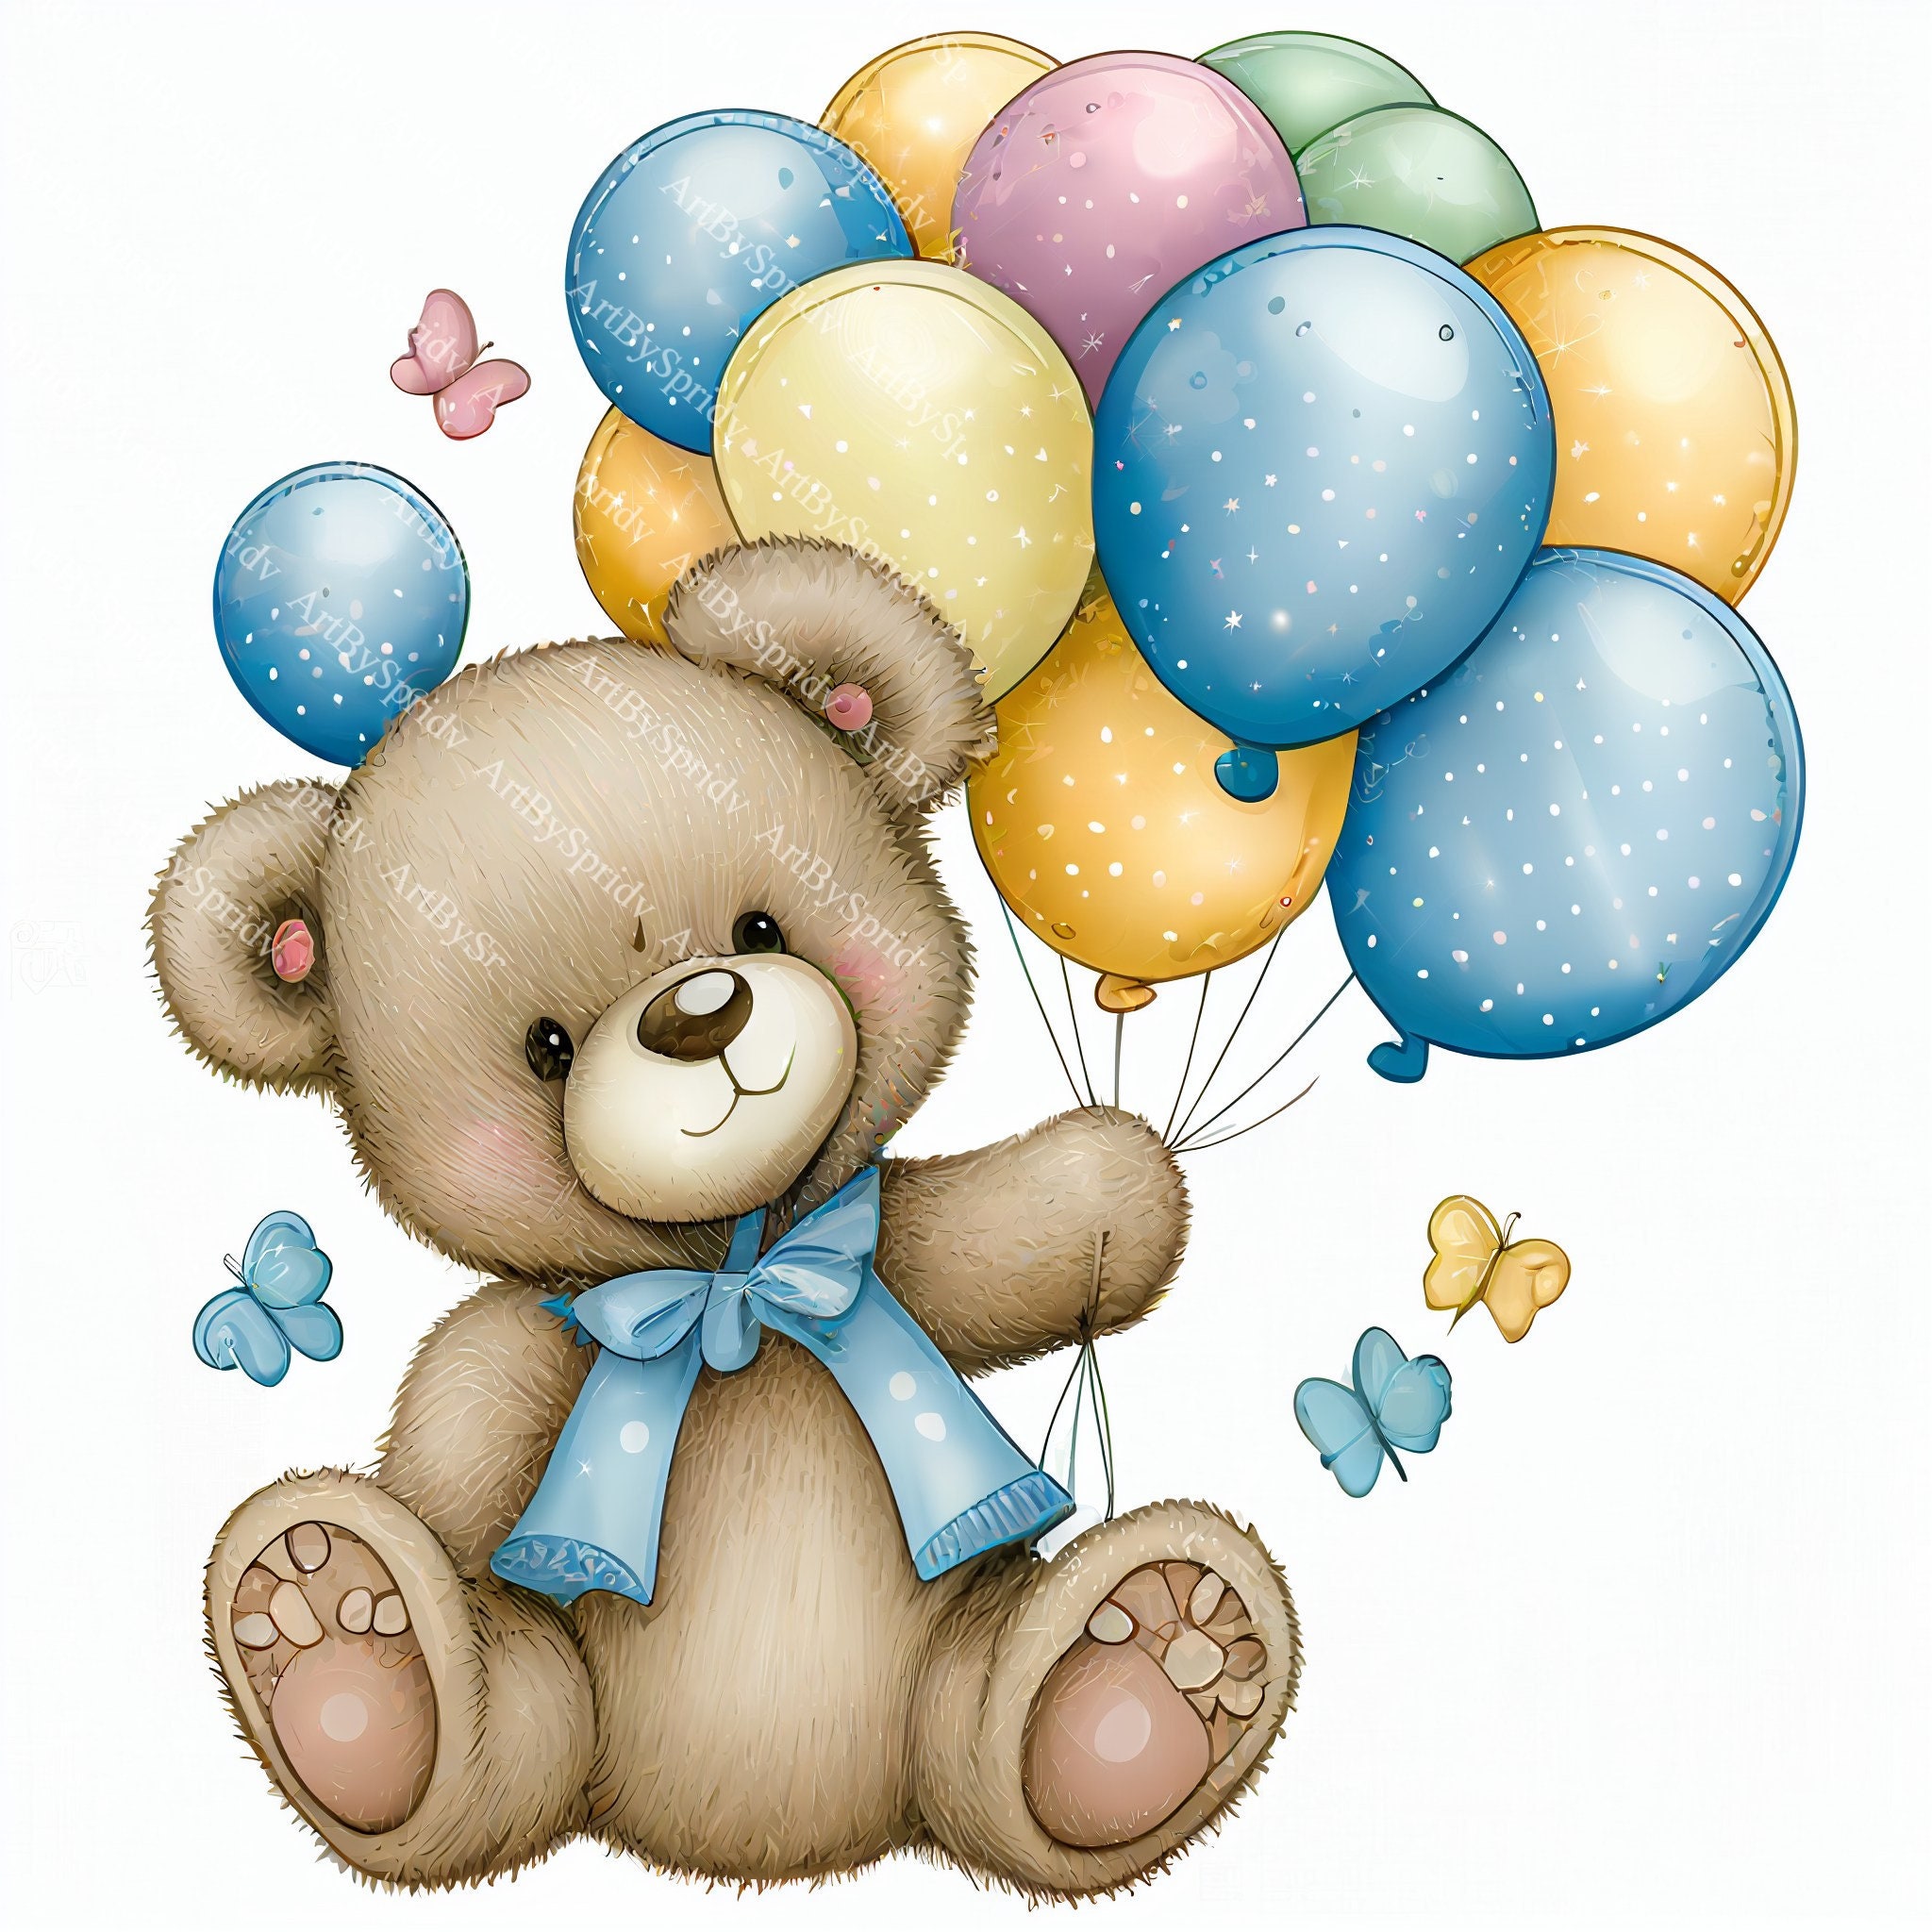 Watercolor Cute Teddy Bear, Girl, Teddy, Baby PNG Transparent Image and  Clipart for Free Download